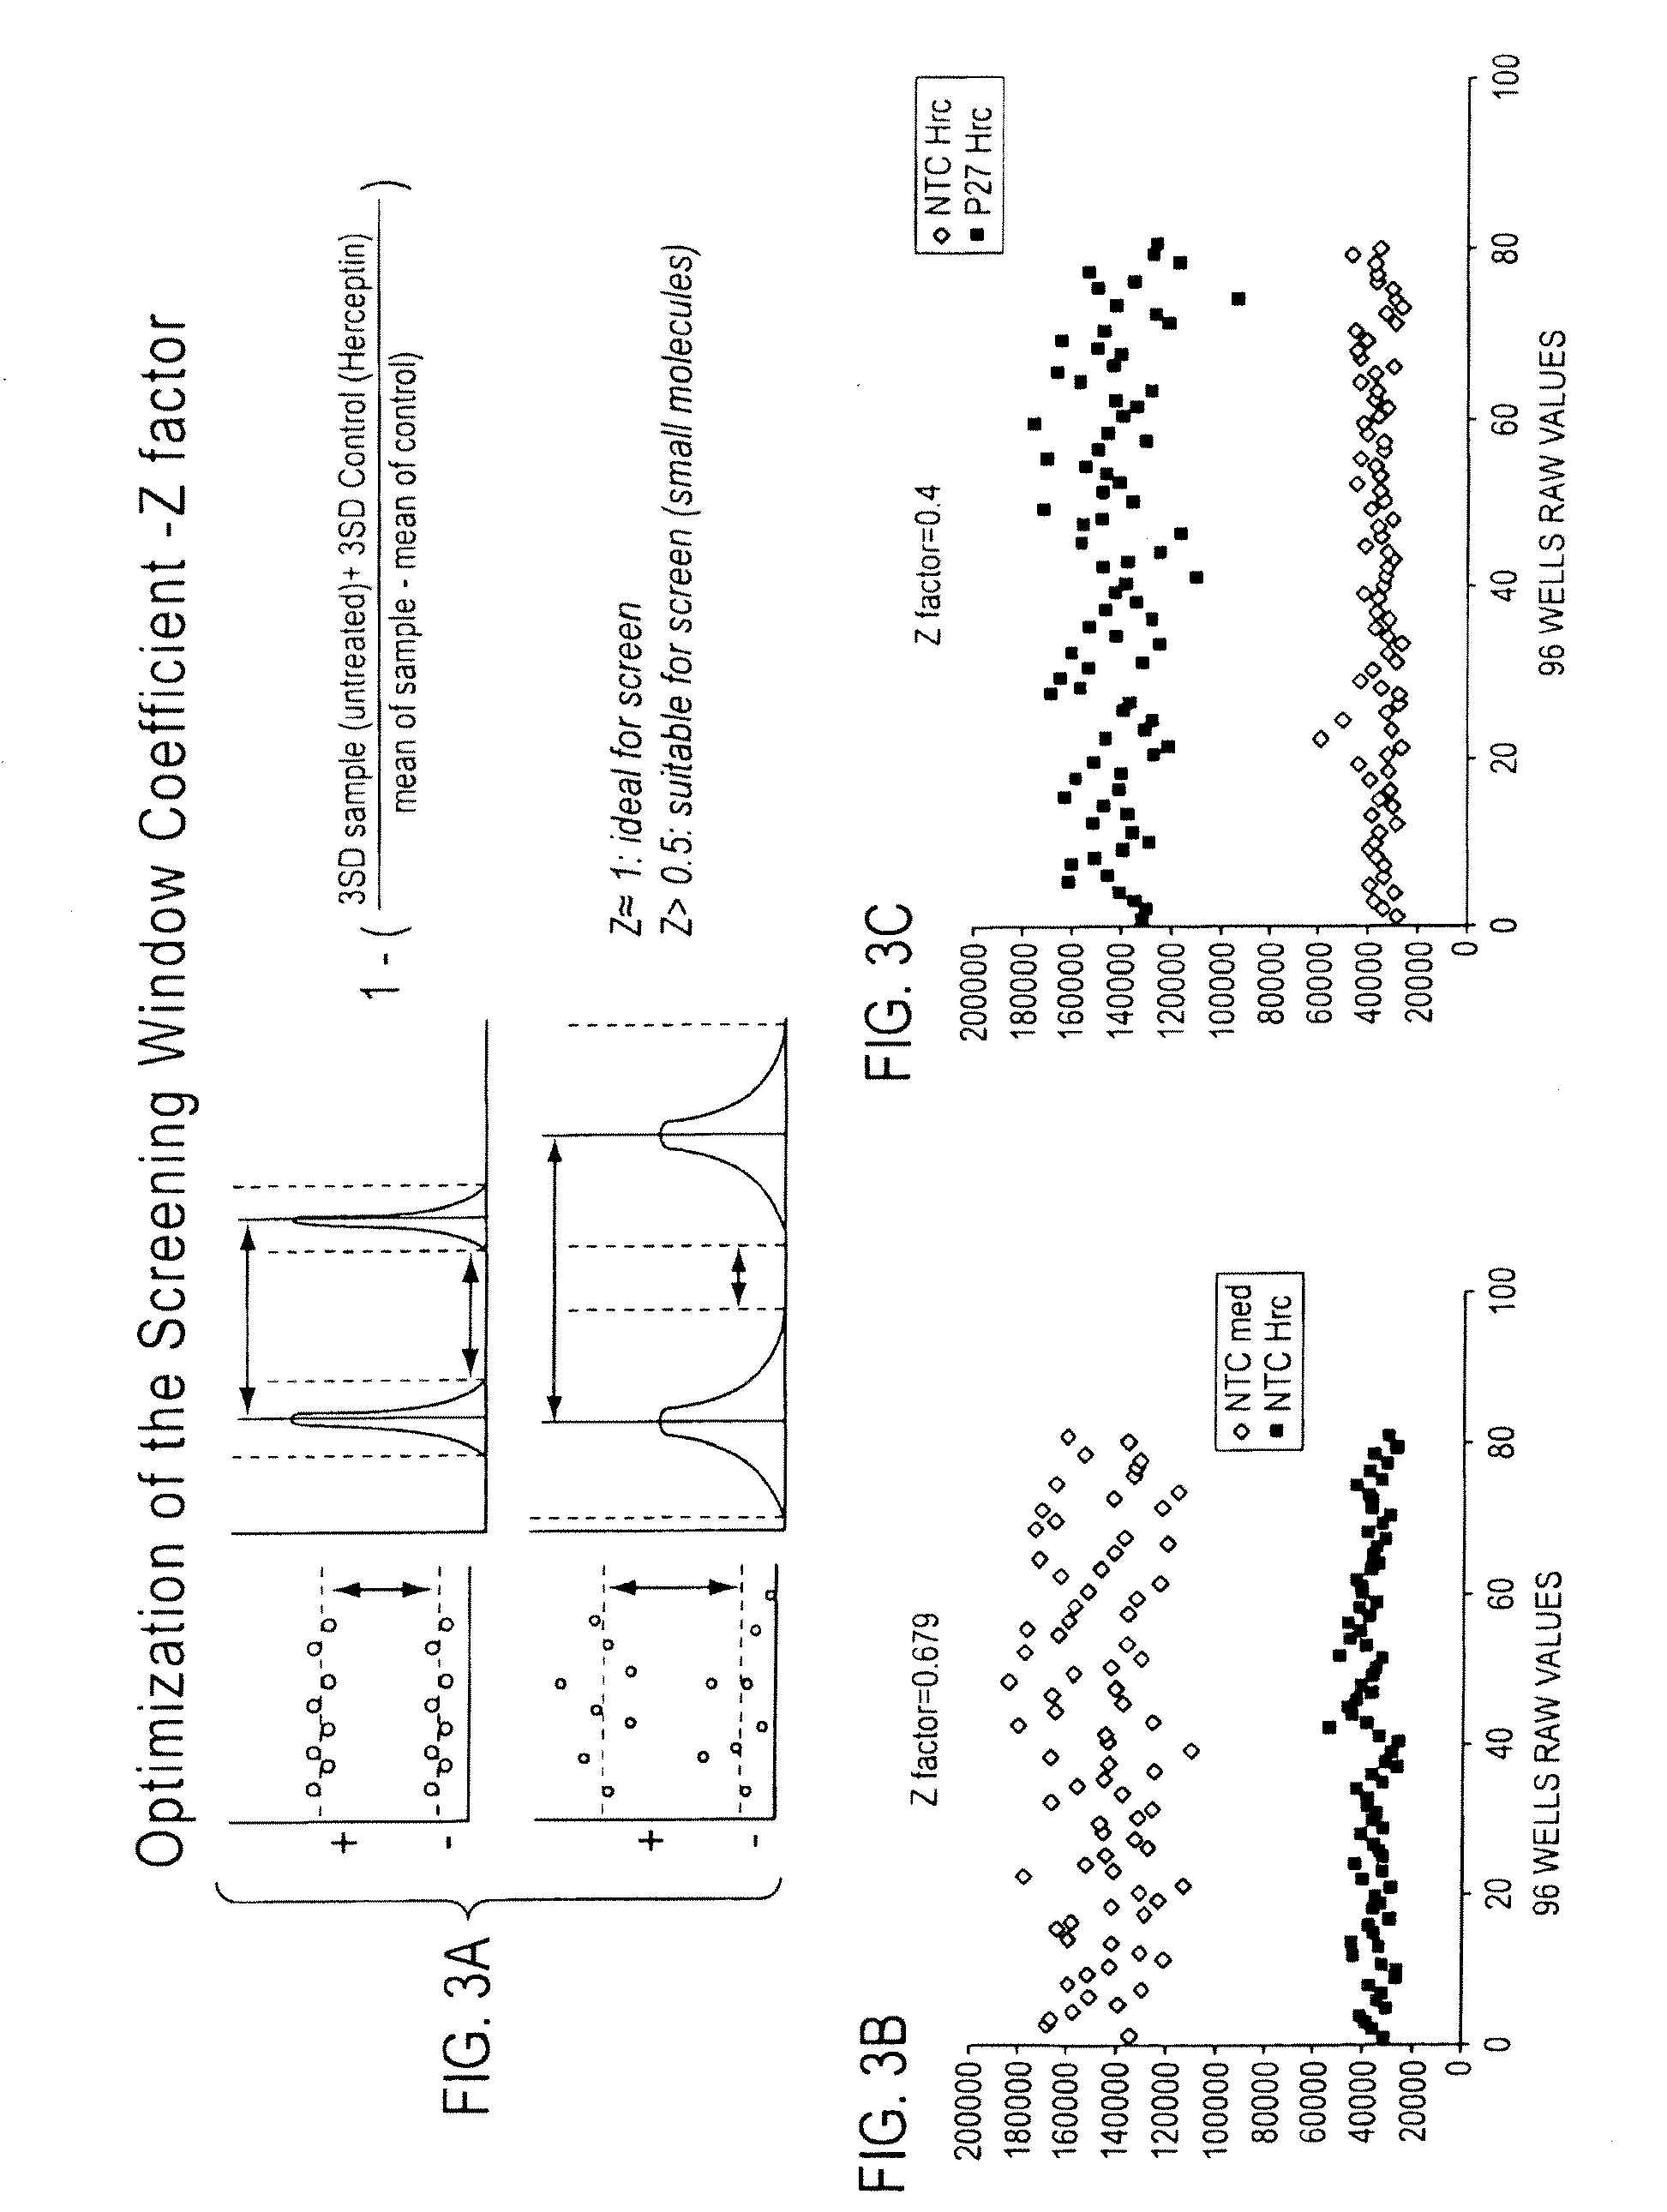 Gene expression markers of tumor resistance to her2 inhibitor treatment